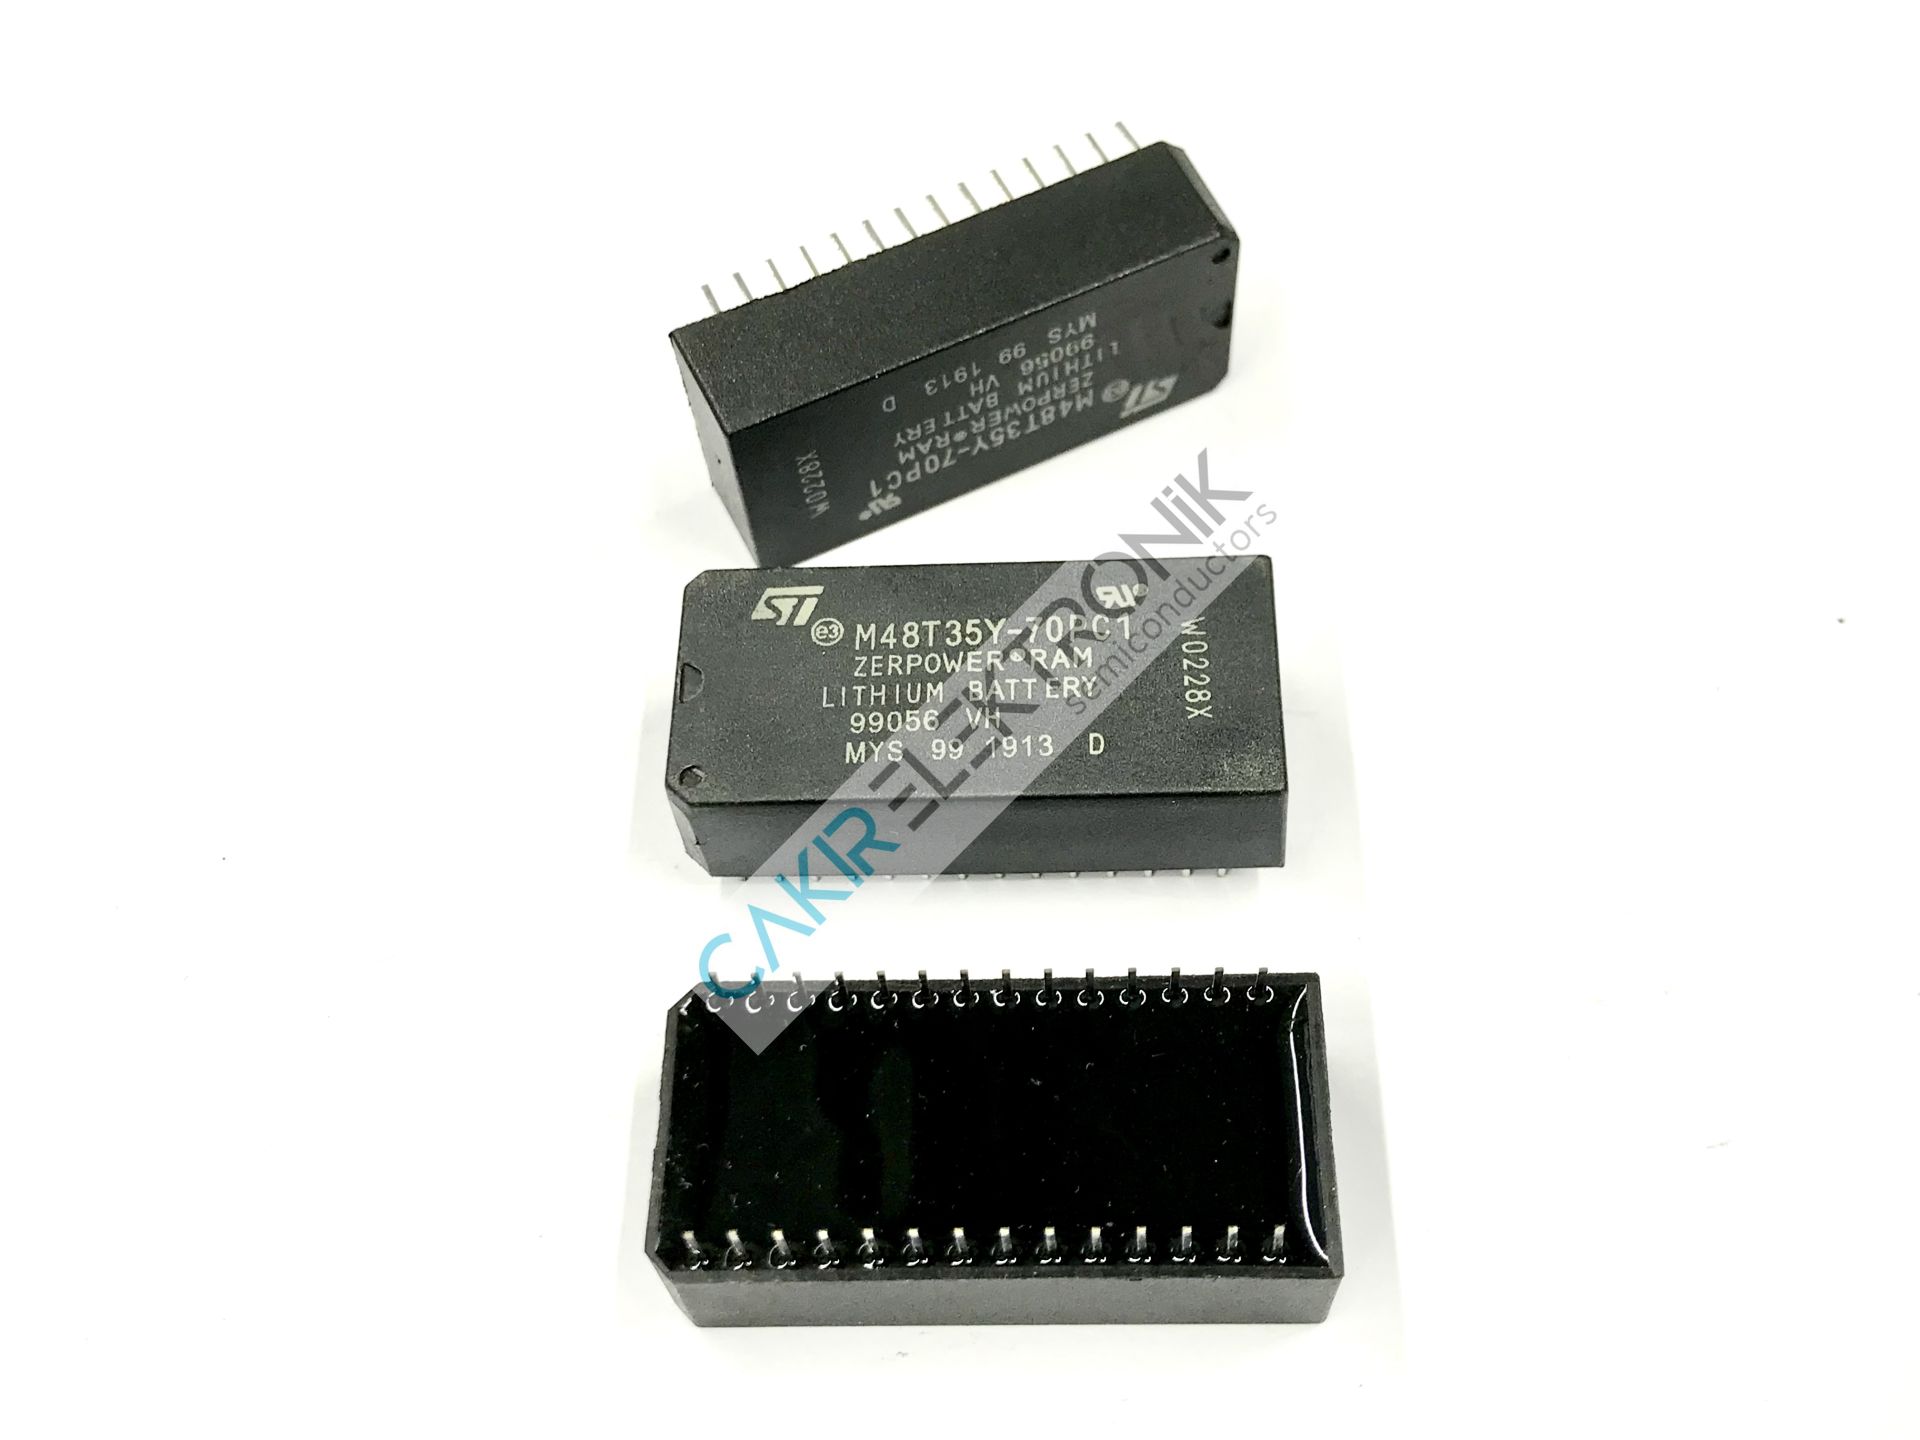 M48T35Y-70PC1 PDIP-28 REAL TIME CLOCK IC